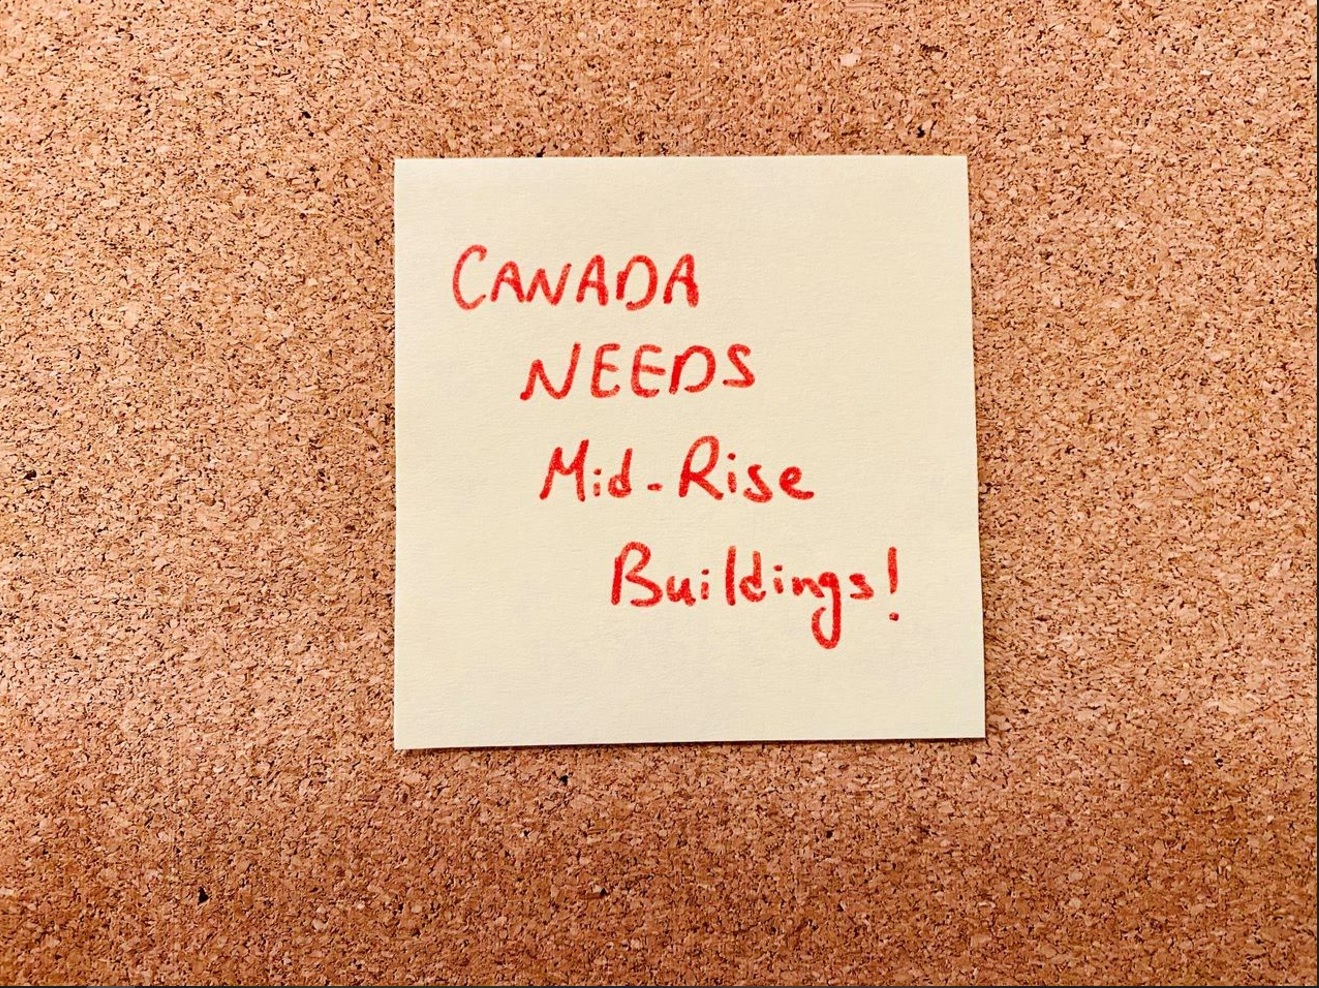 Canada needs Mid-Rise Buildings